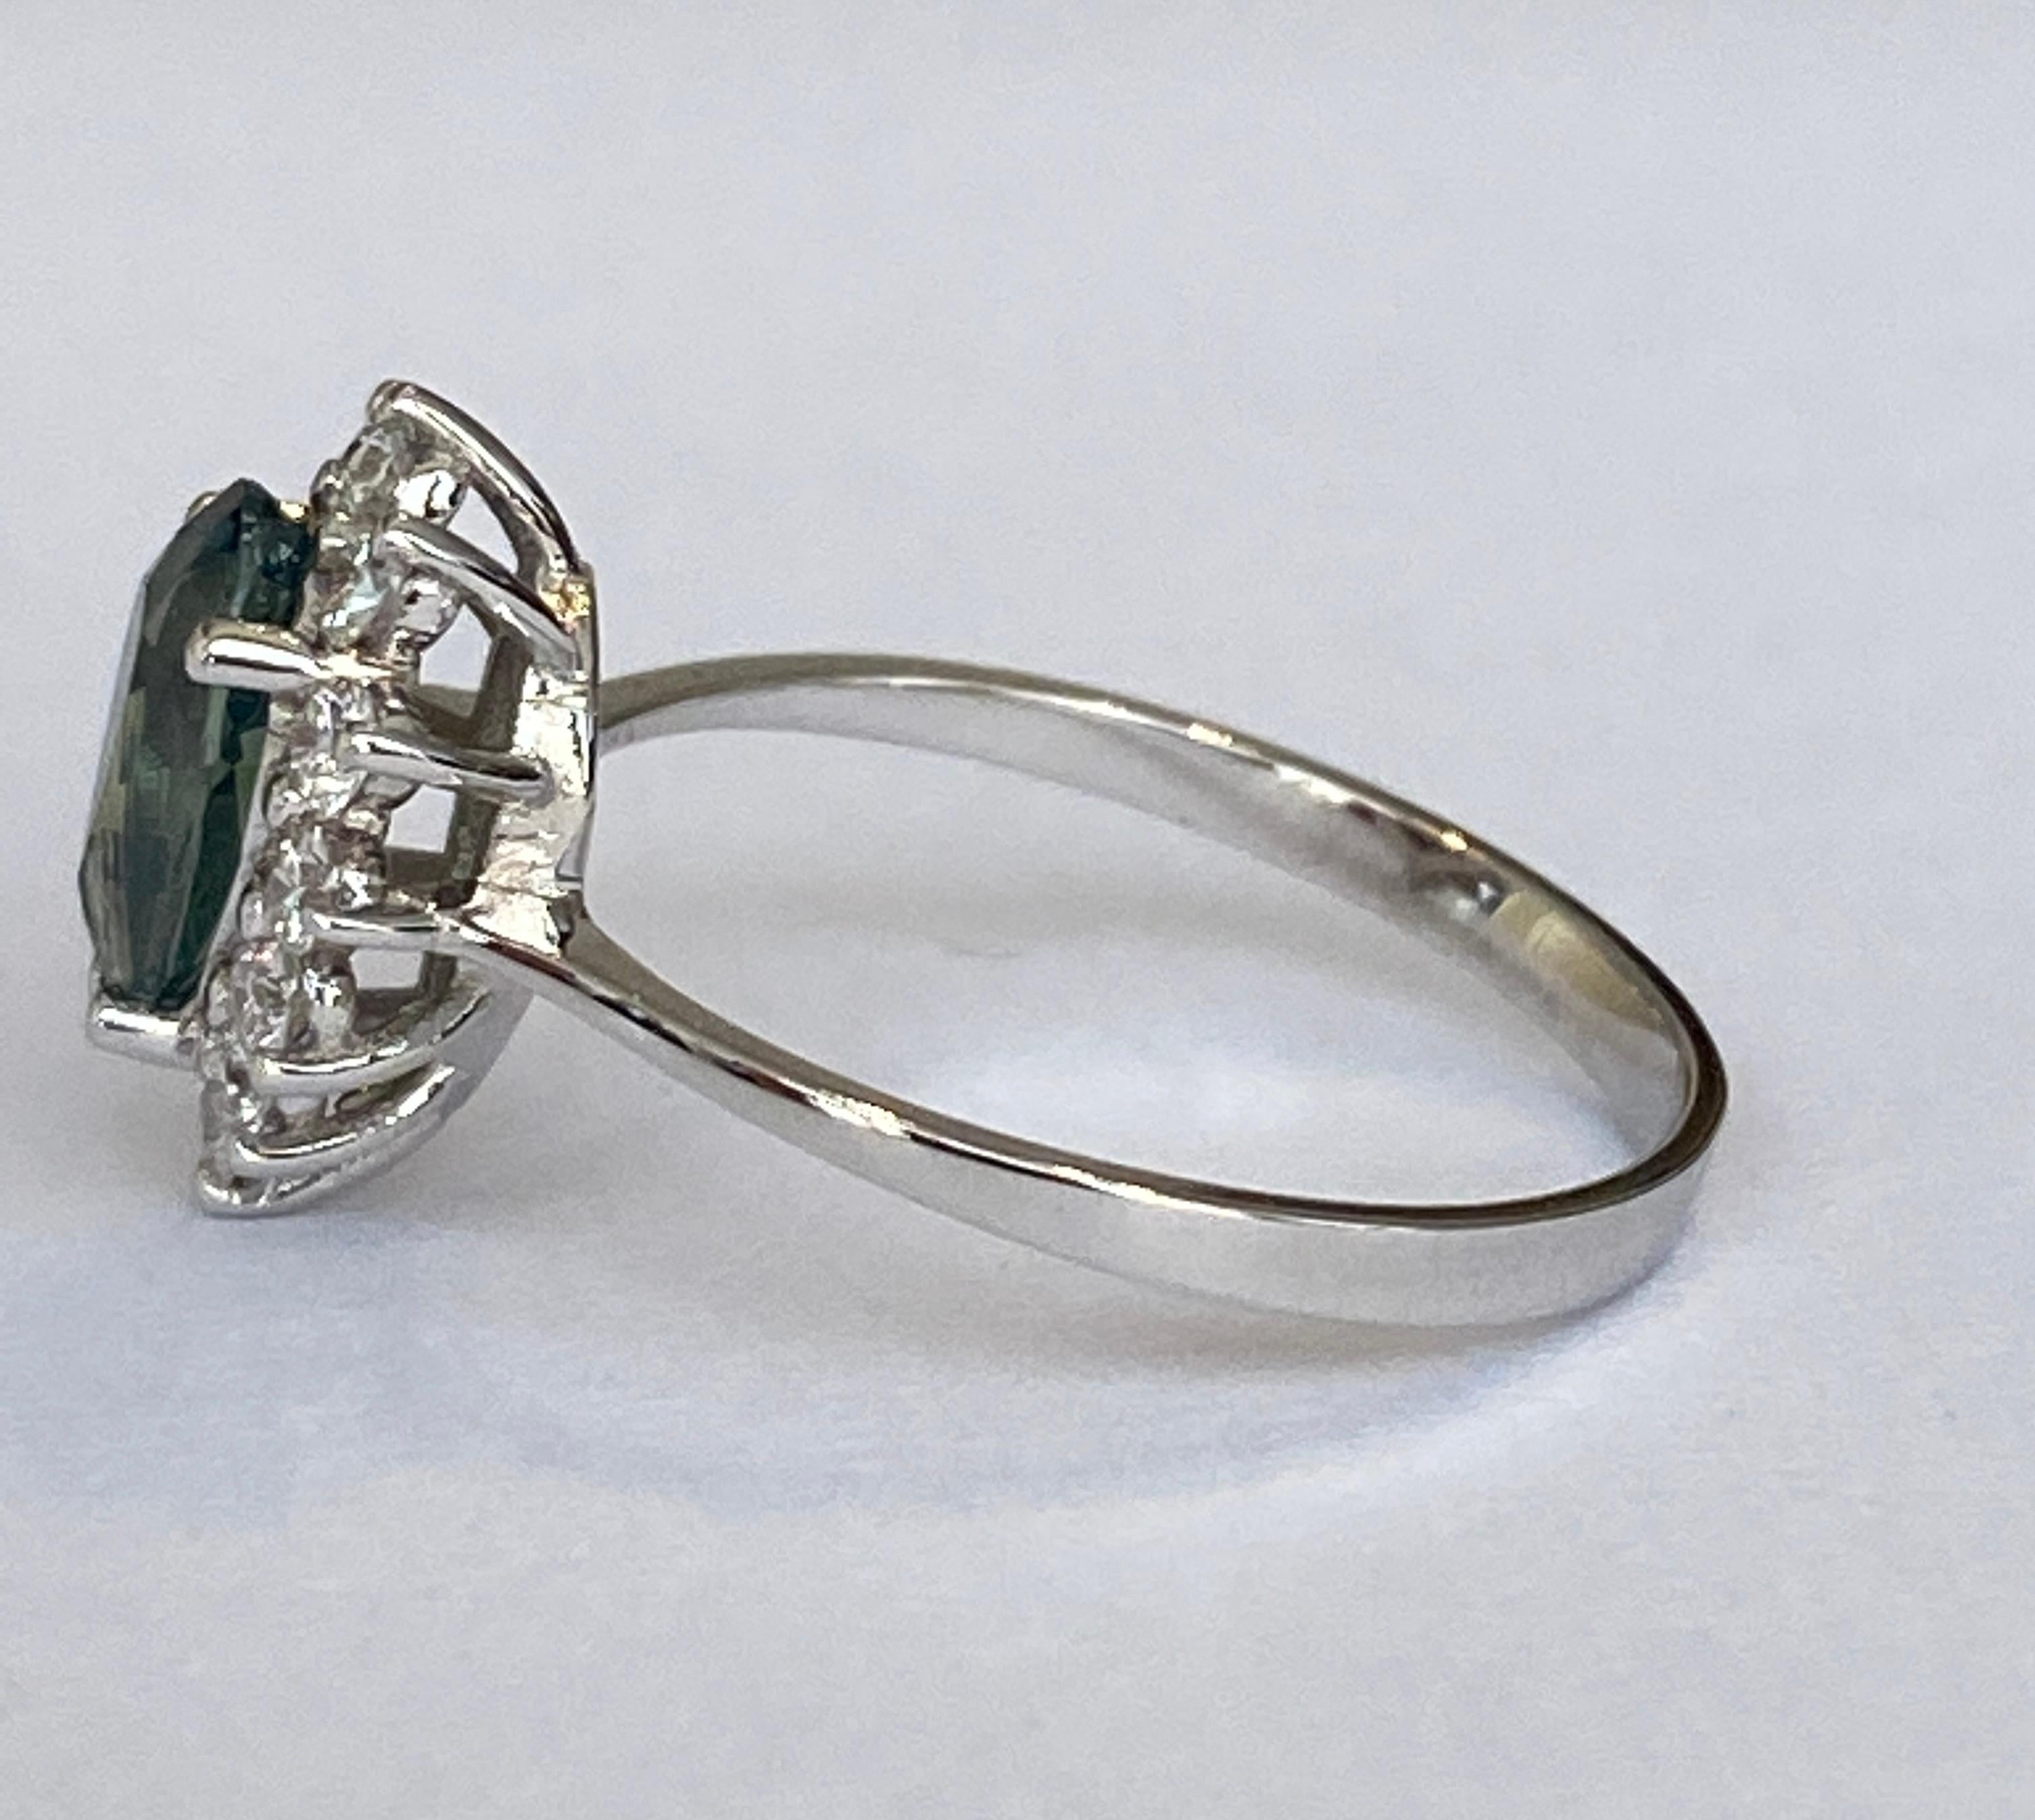 18 Carat White Gold 1.53 Carat Green Sapphire Diamond Cocktail Ring For Sale 1